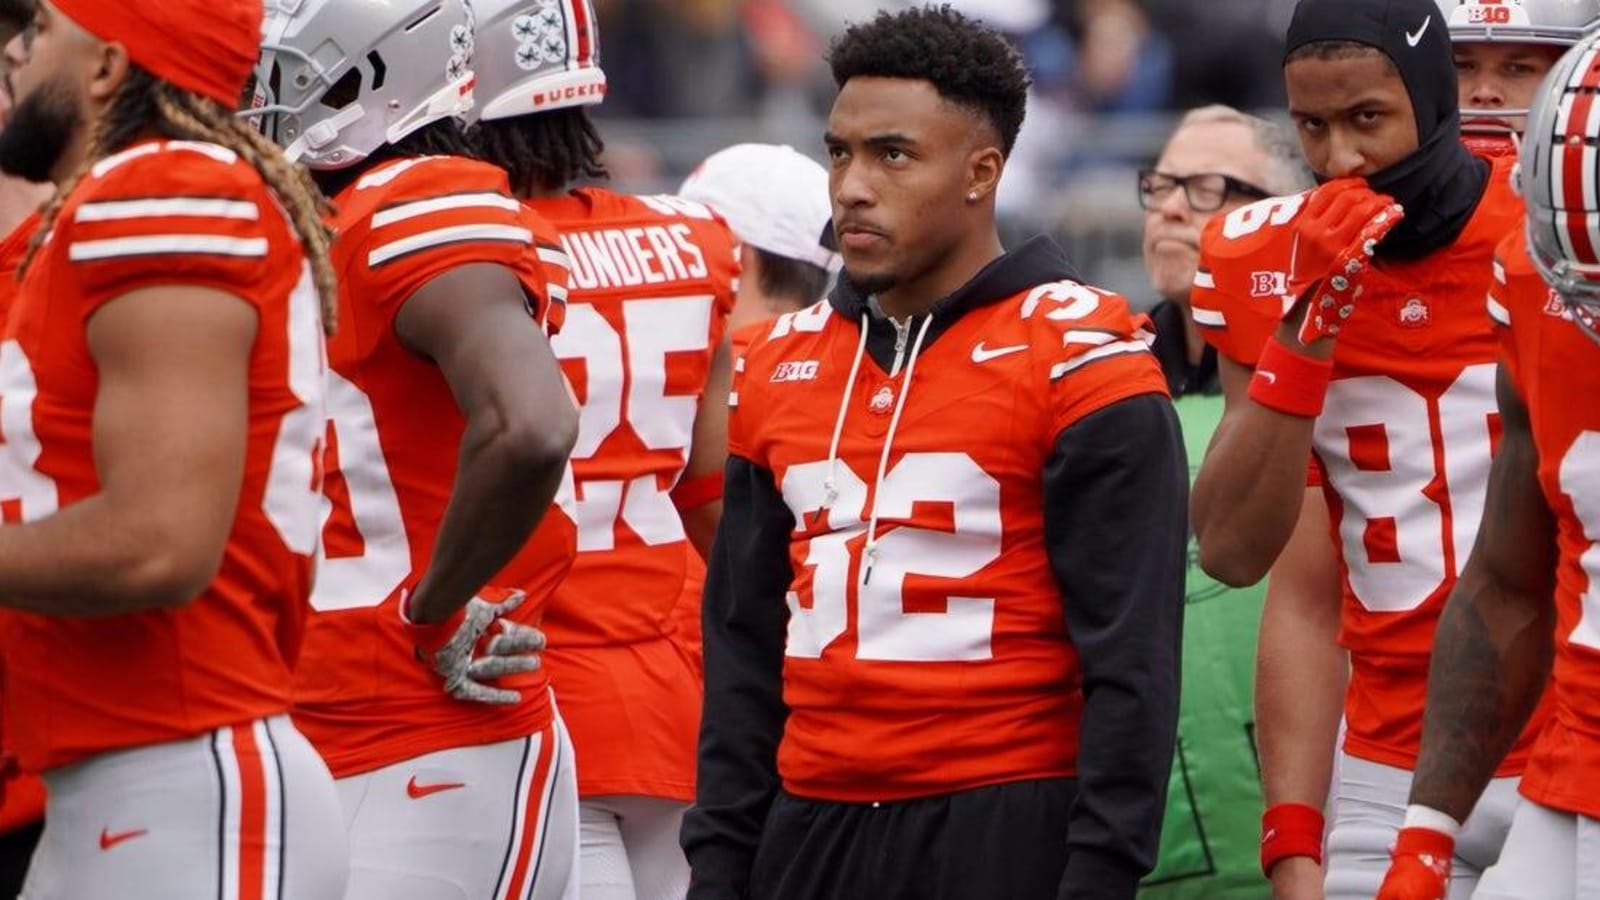 Ohio St. RB TreVeyon Henderson to return from 3-game injury absence